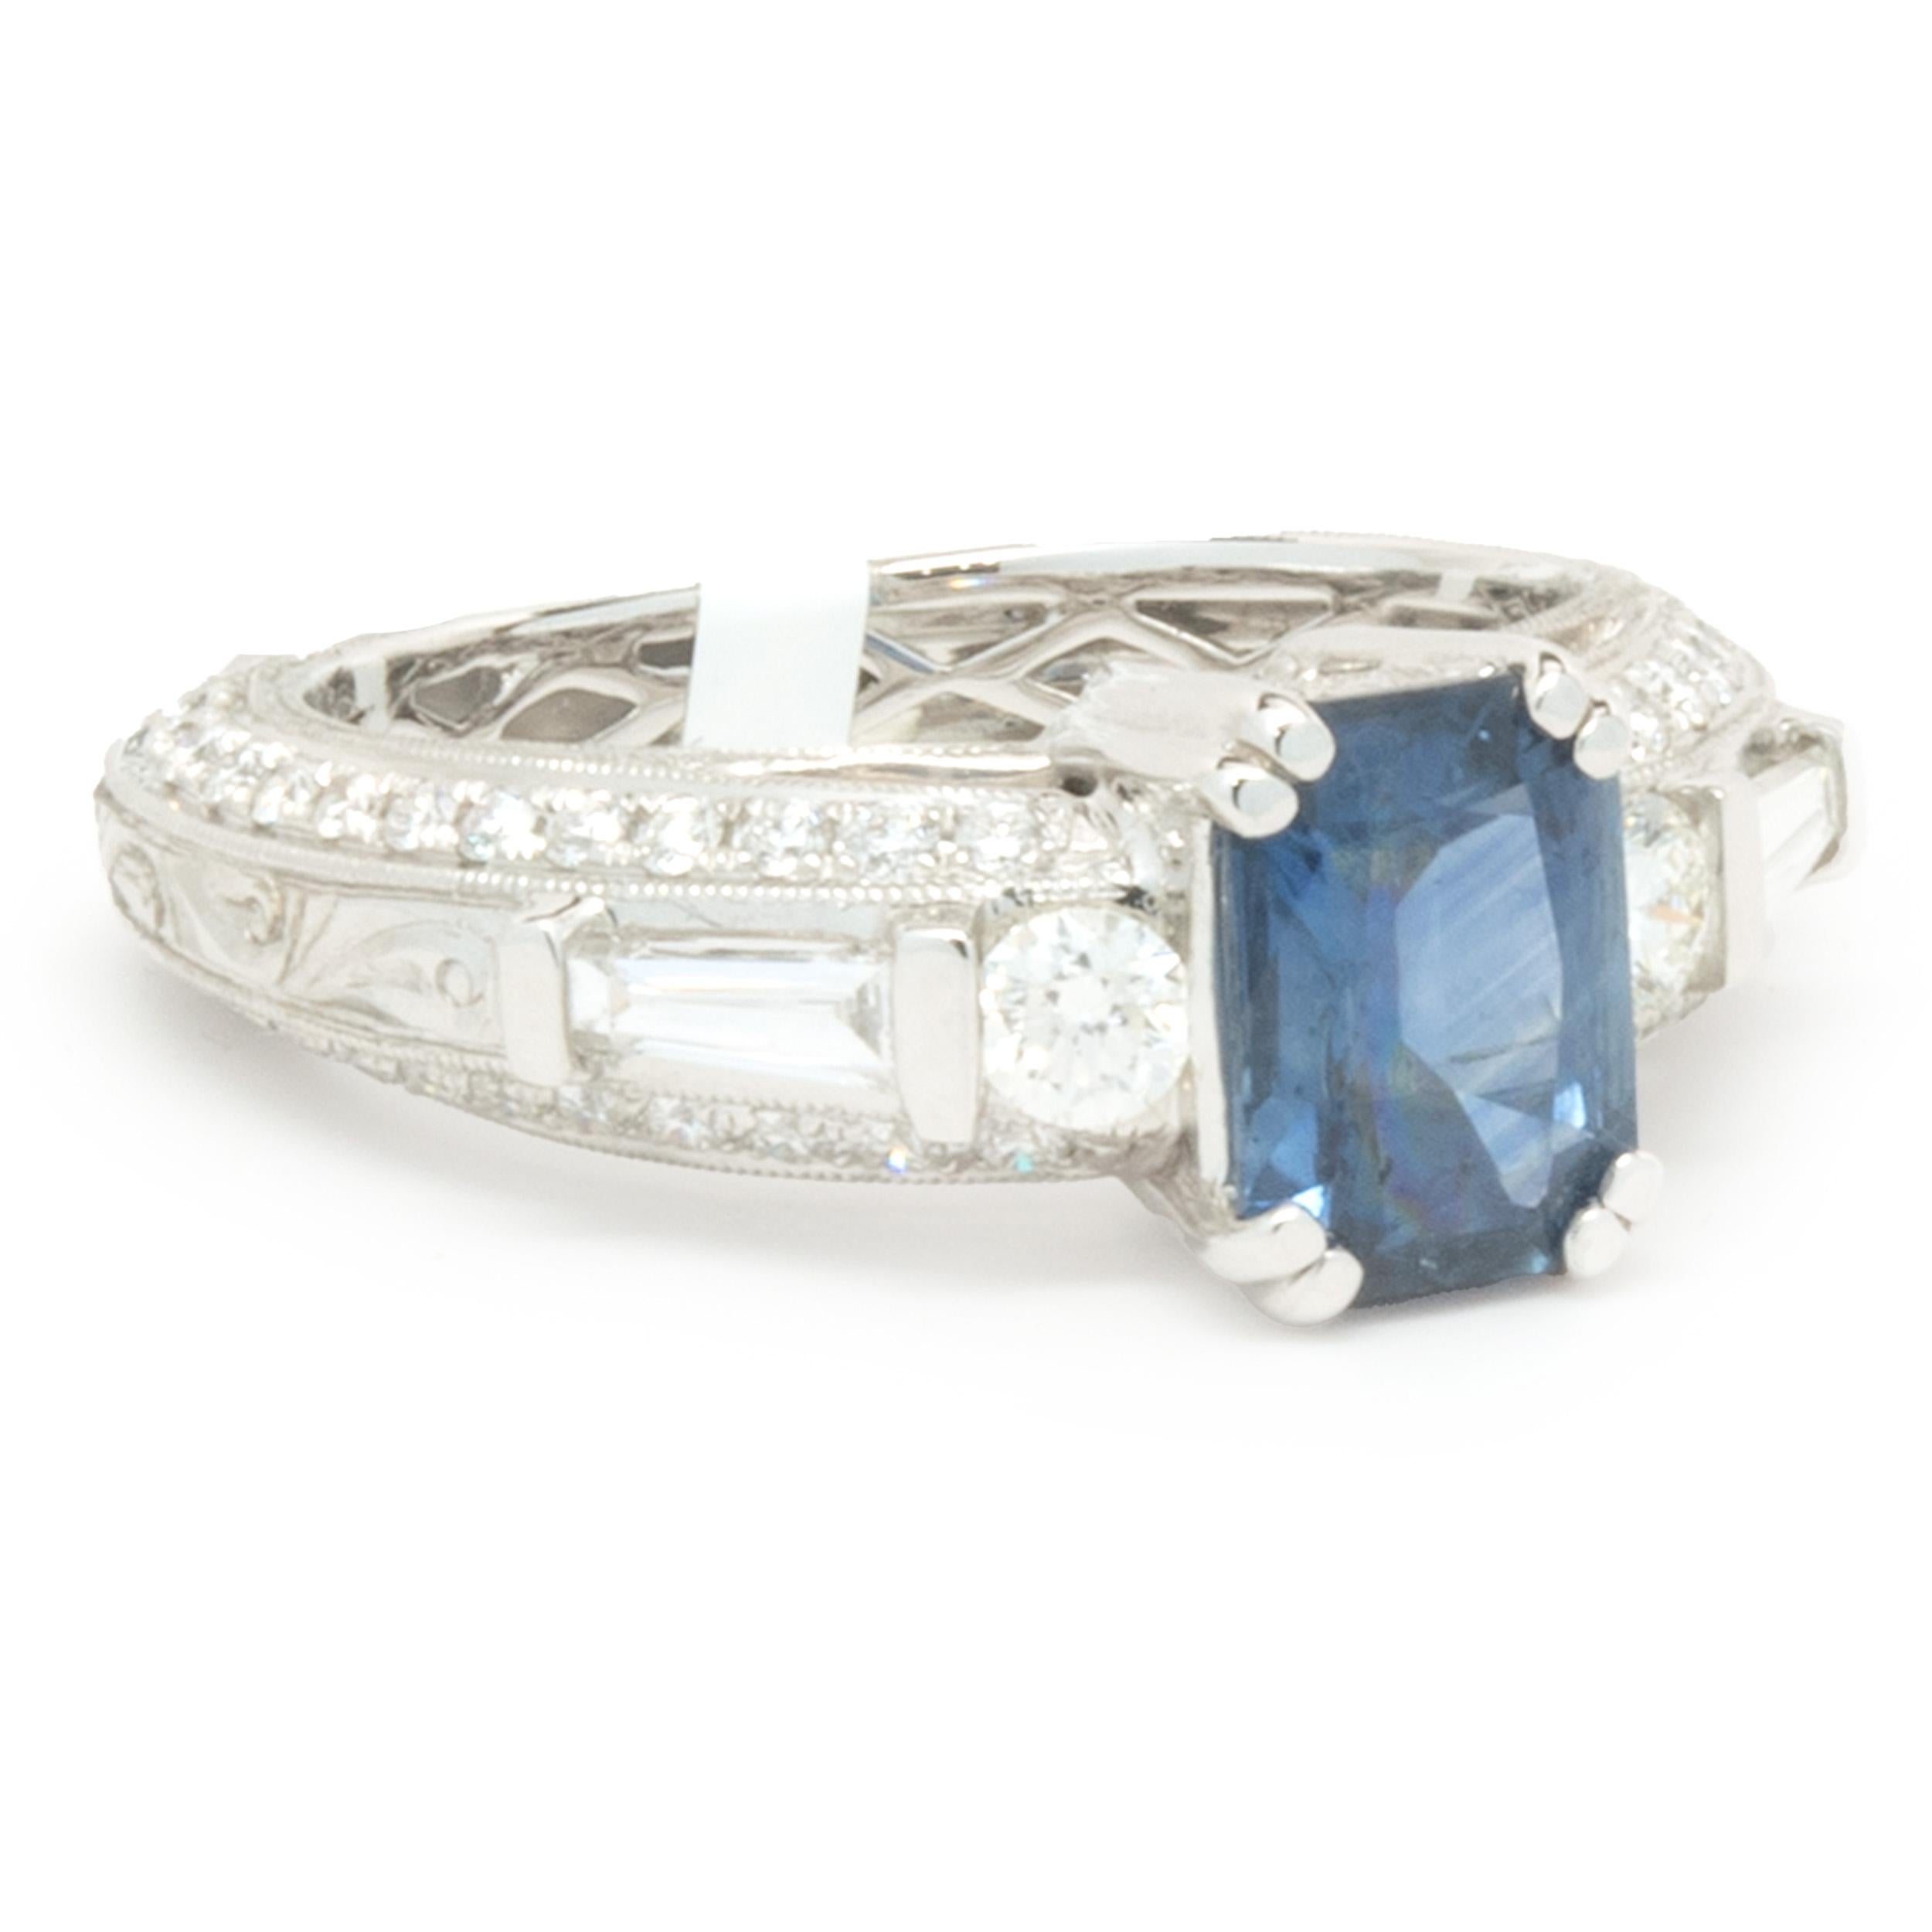 Designer: custom
Material: 18K white gold
Diamond: 56 round brilliant and baguette cut = 0.95cttw
Color: G
Clarity: VS2
Sapphire: emerald cut = 1.59cttw
Ring Size: 7 (complimentary sizing available)
Weight: 6.96 grams